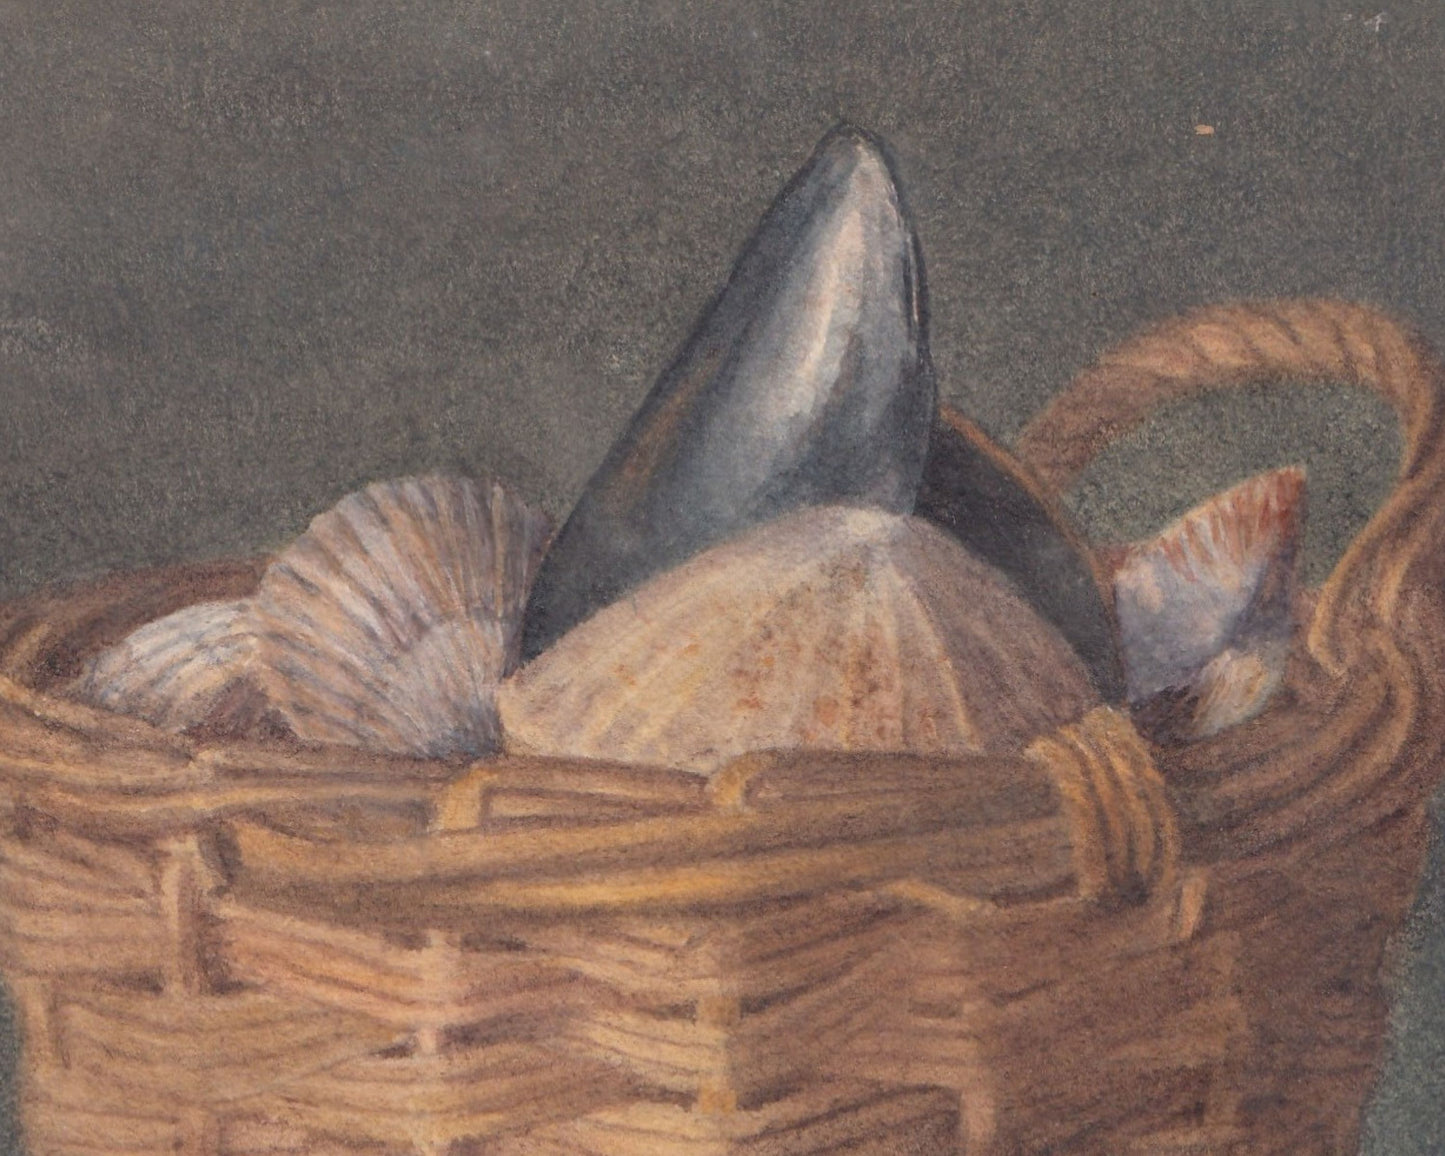 Basket of Shells Watercolour Painting